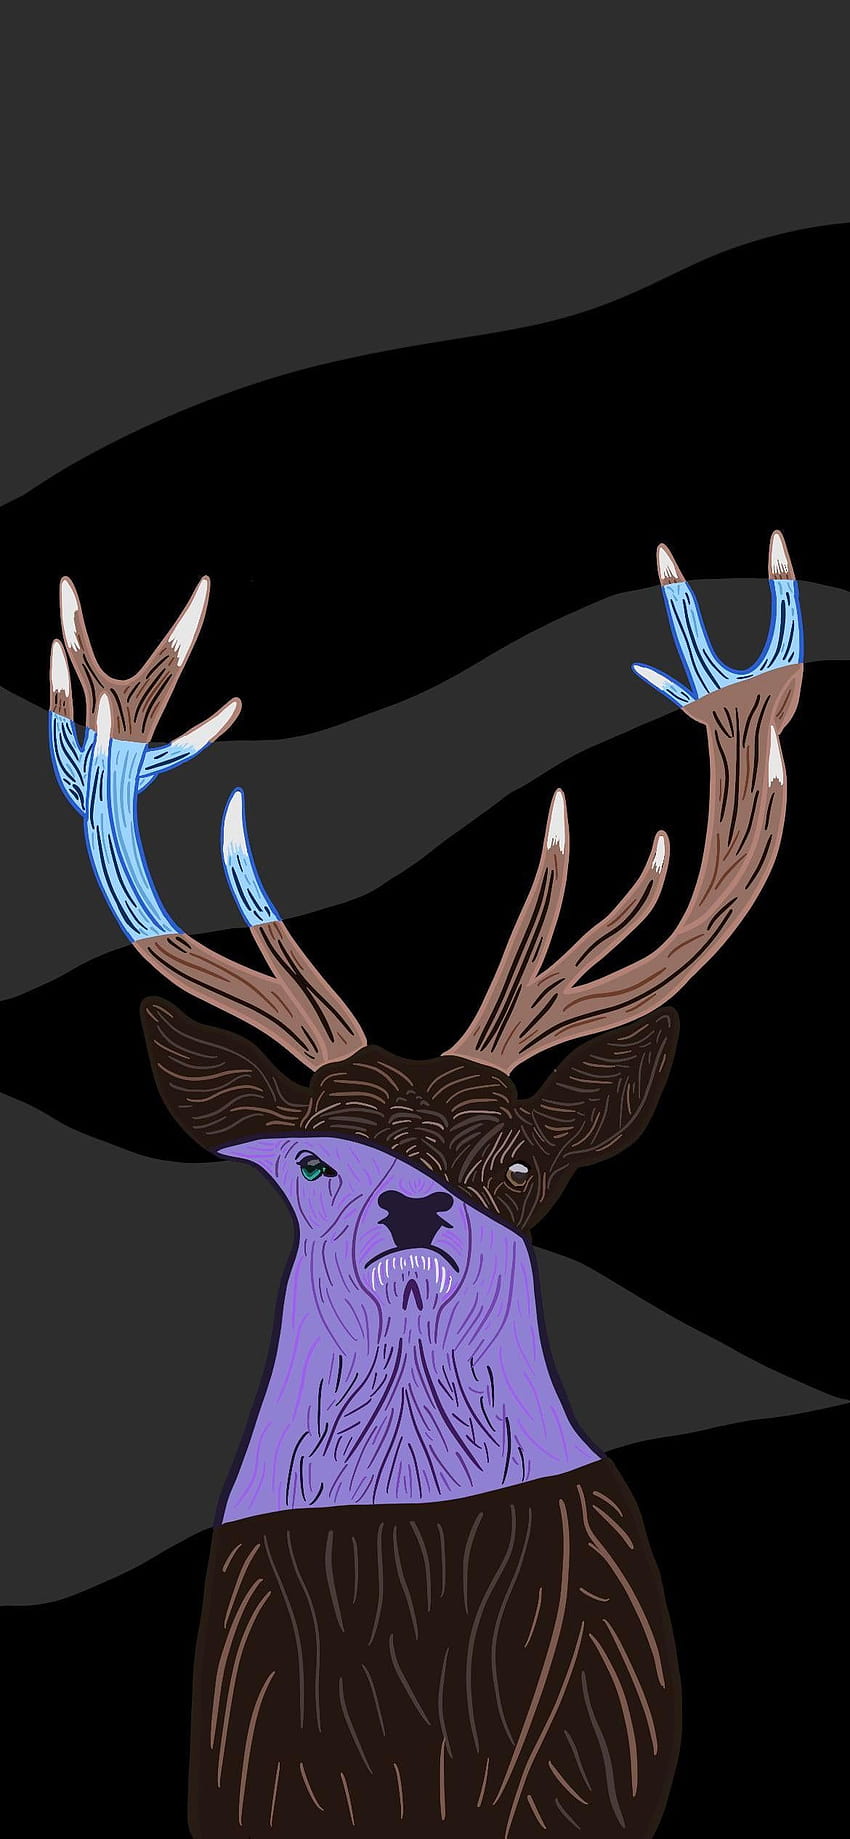 Drew this stag in Procreate, hope you like it [2532x1170] : Amoledbackgrounds HD phone wallpaper